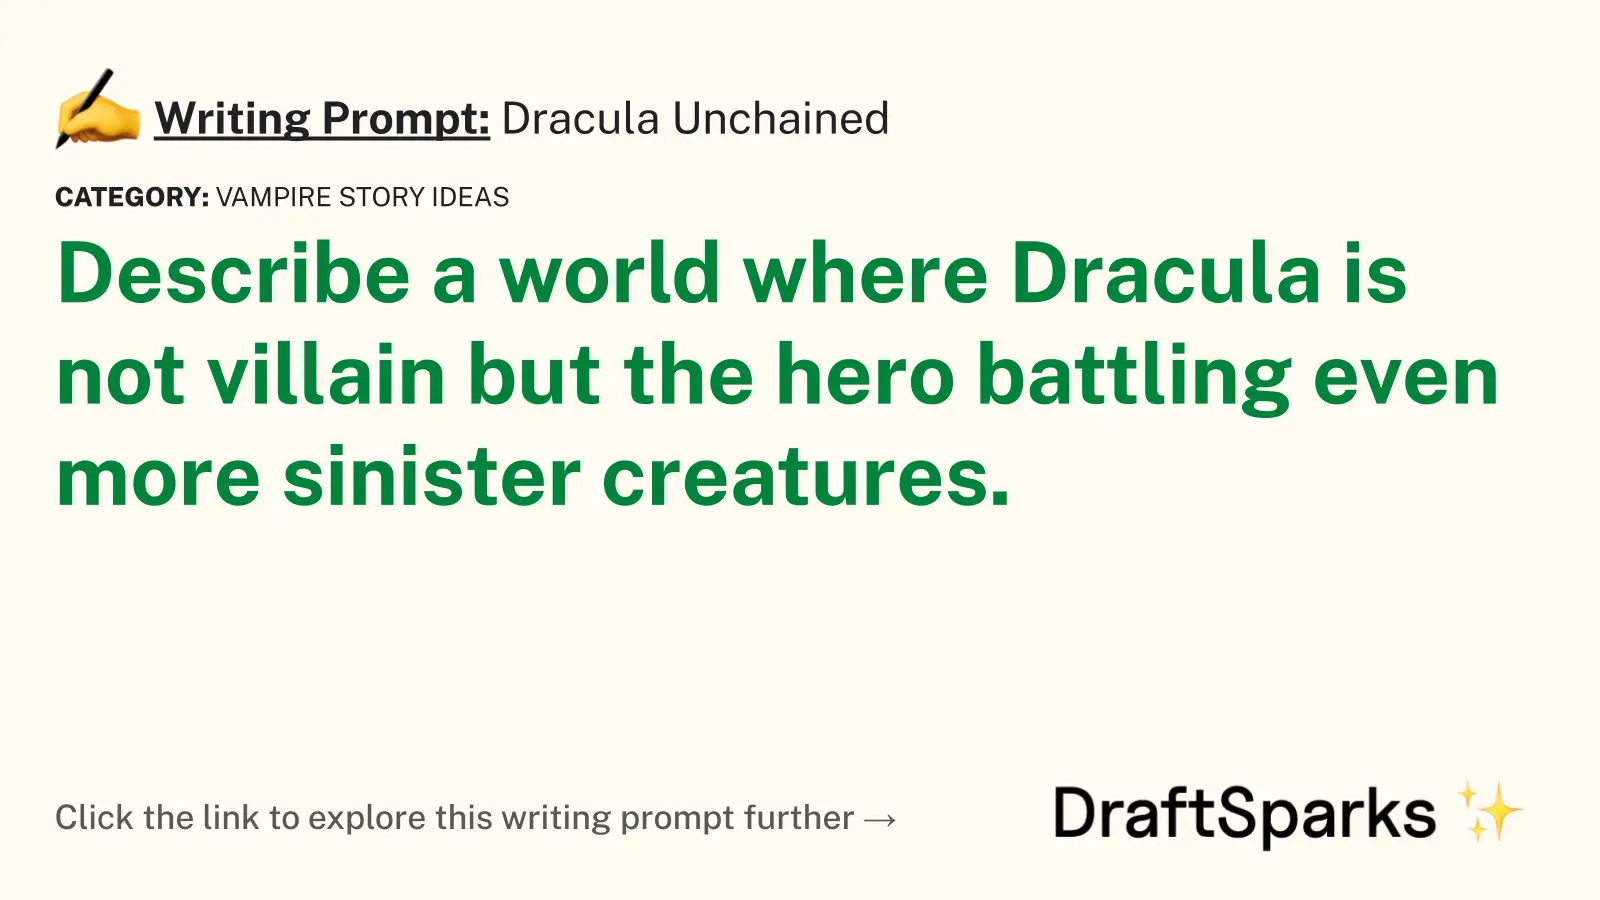 Dracula Unchained